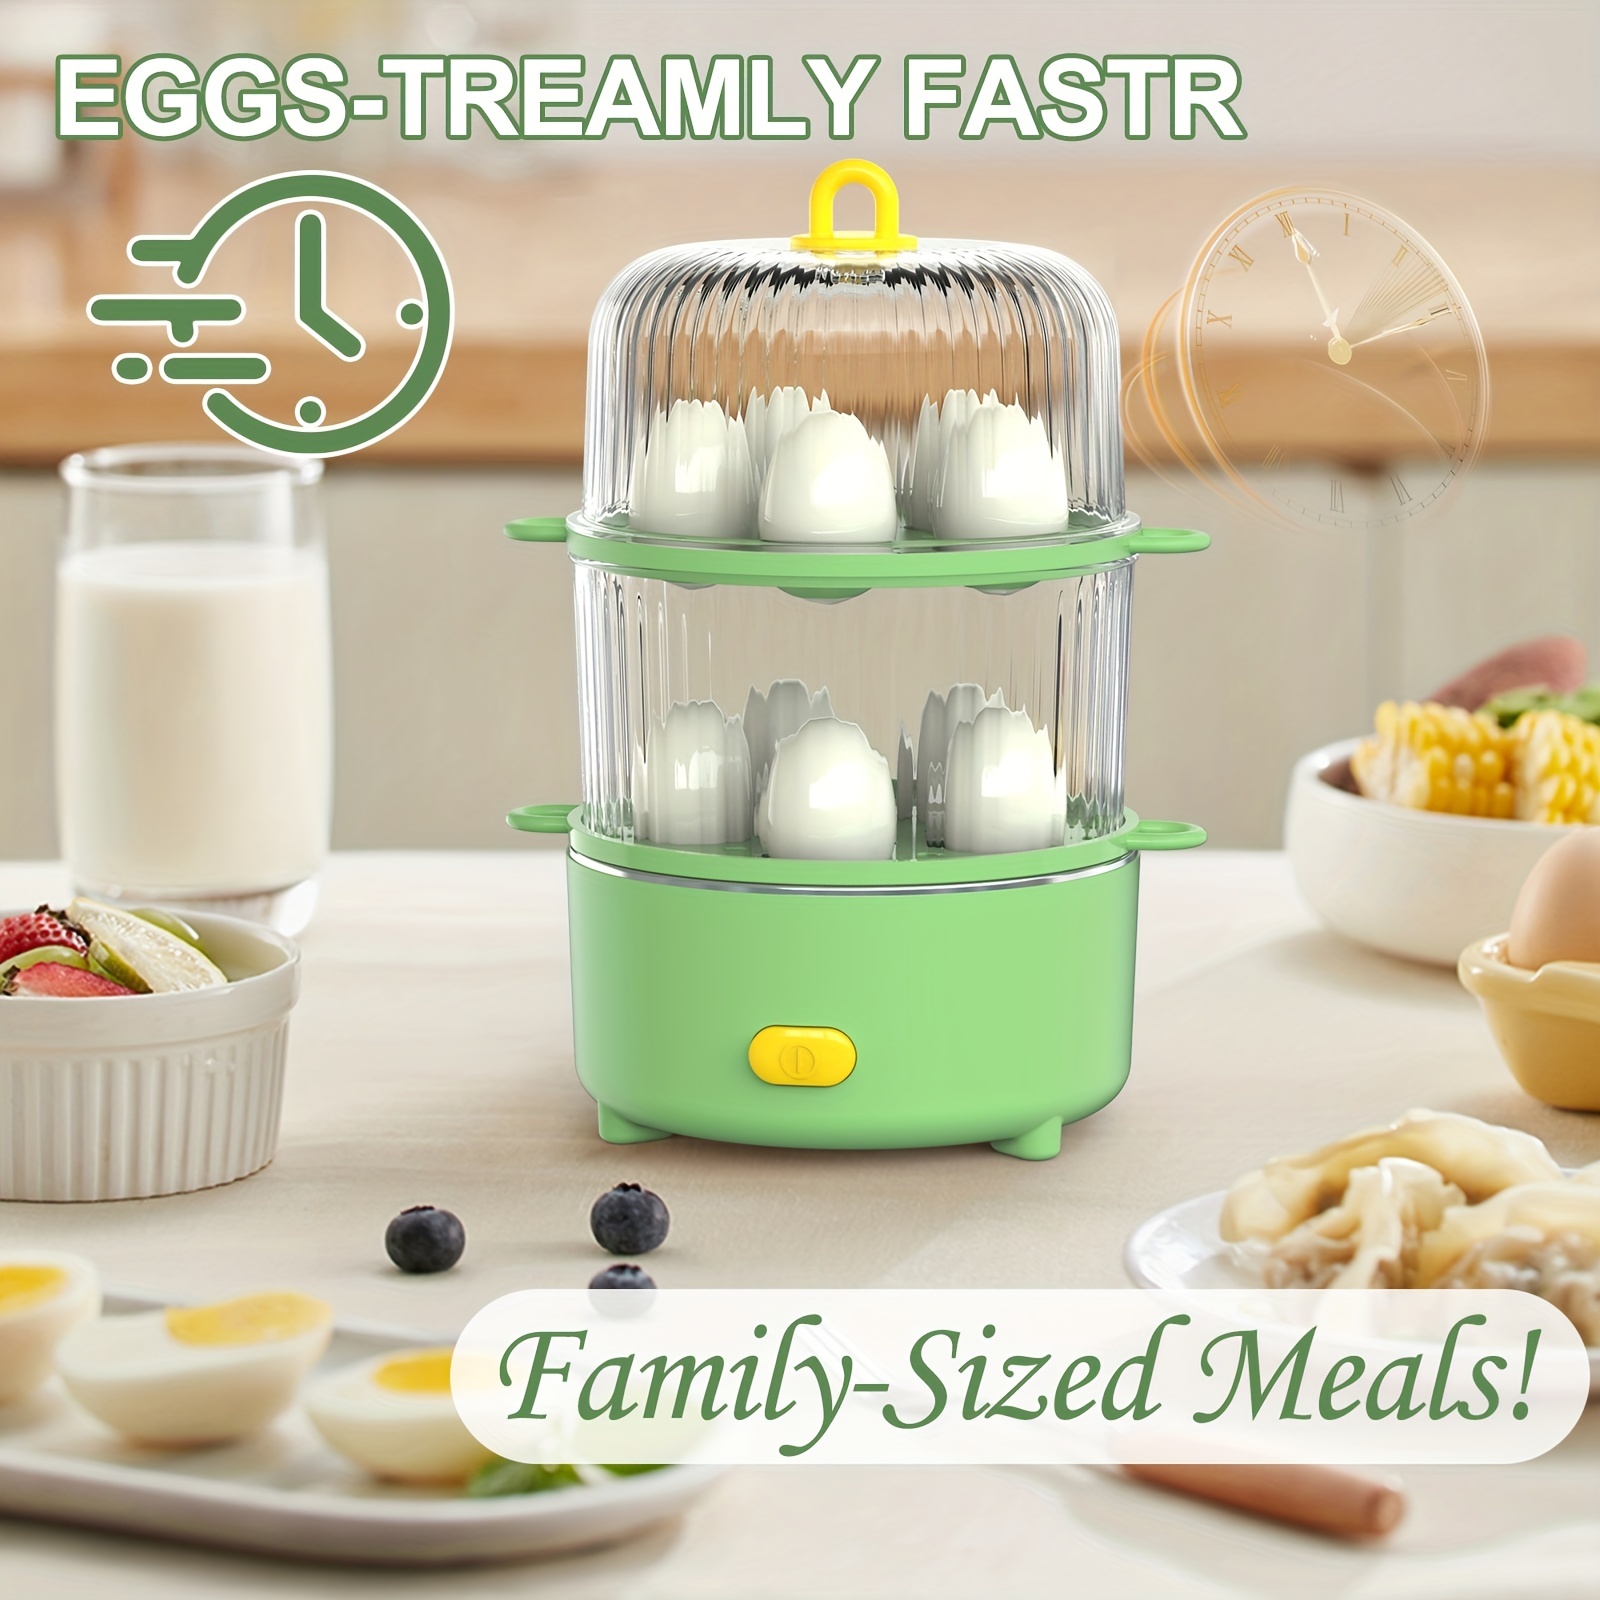  Egg Cooker Rapid Poacher Maker UP TO 14 Eggs Capacity Electric  Large Egg Boiler for Hard Boiled Eggs with Auto Shut Off Double/Single  Stack Cool Kitchen Gadgets Home Accessories (Double Stack)